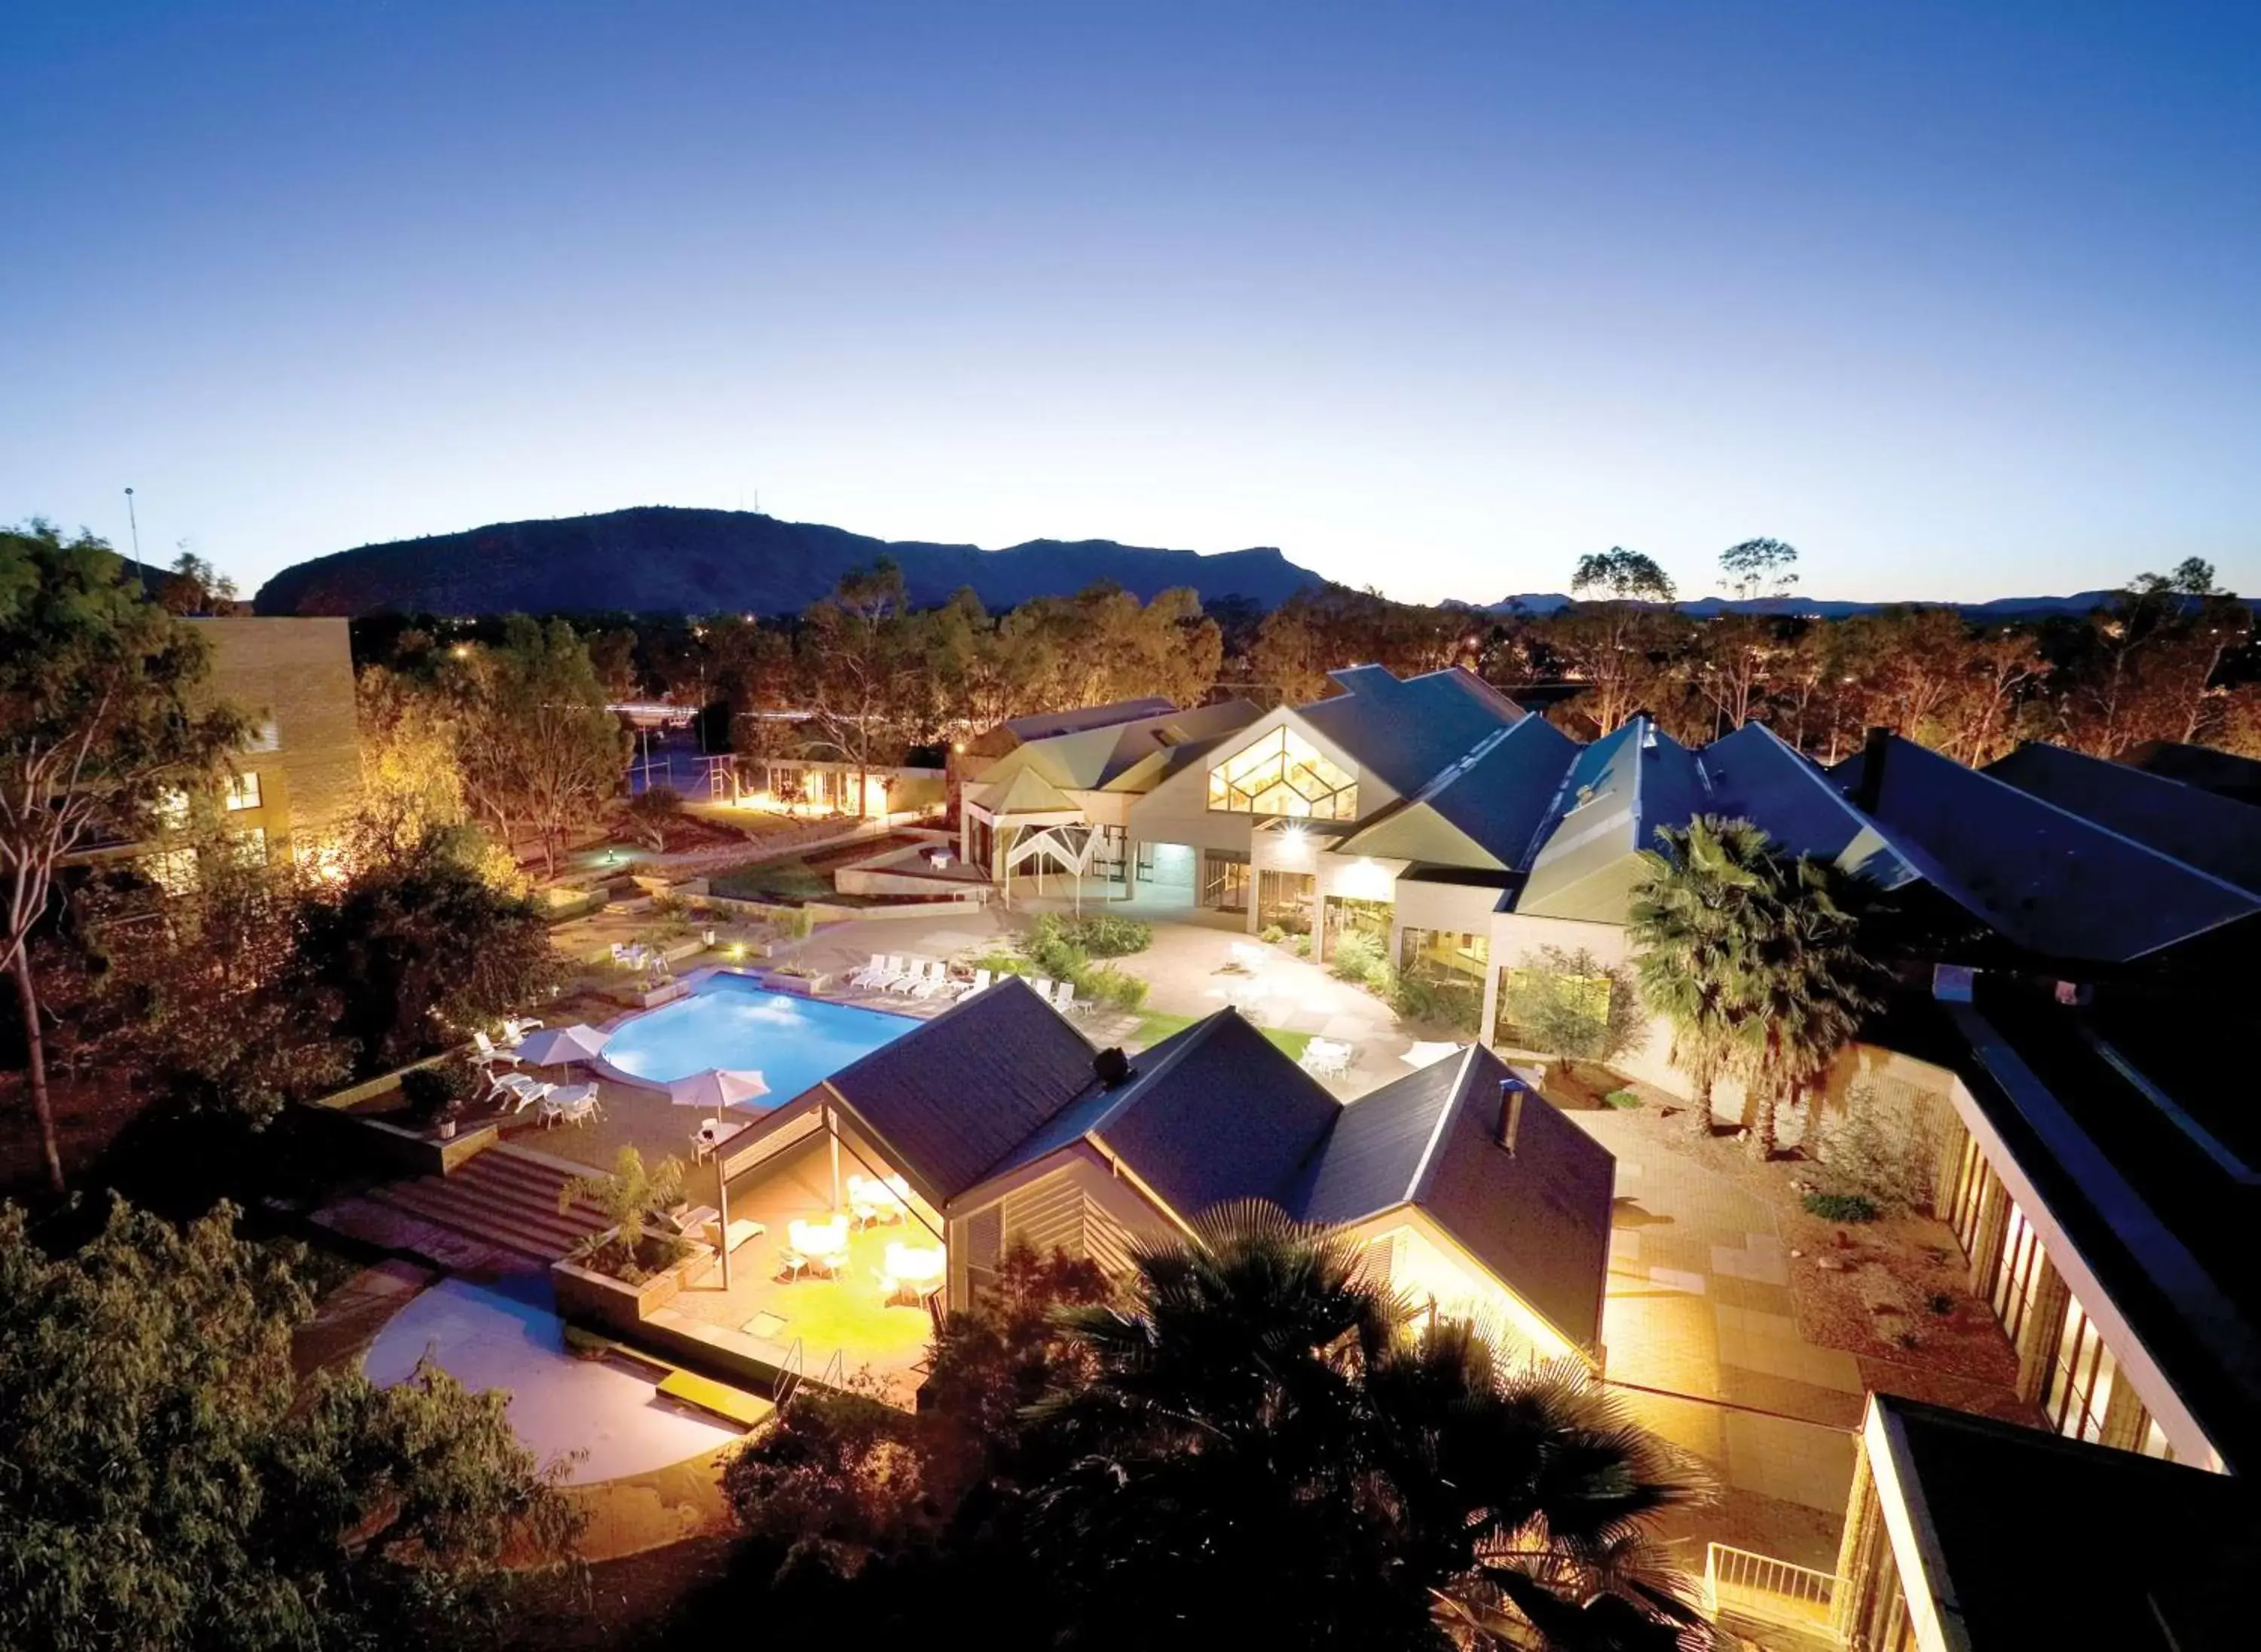 Property building, Pool View in DoubleTree By Hilton Alice Springs